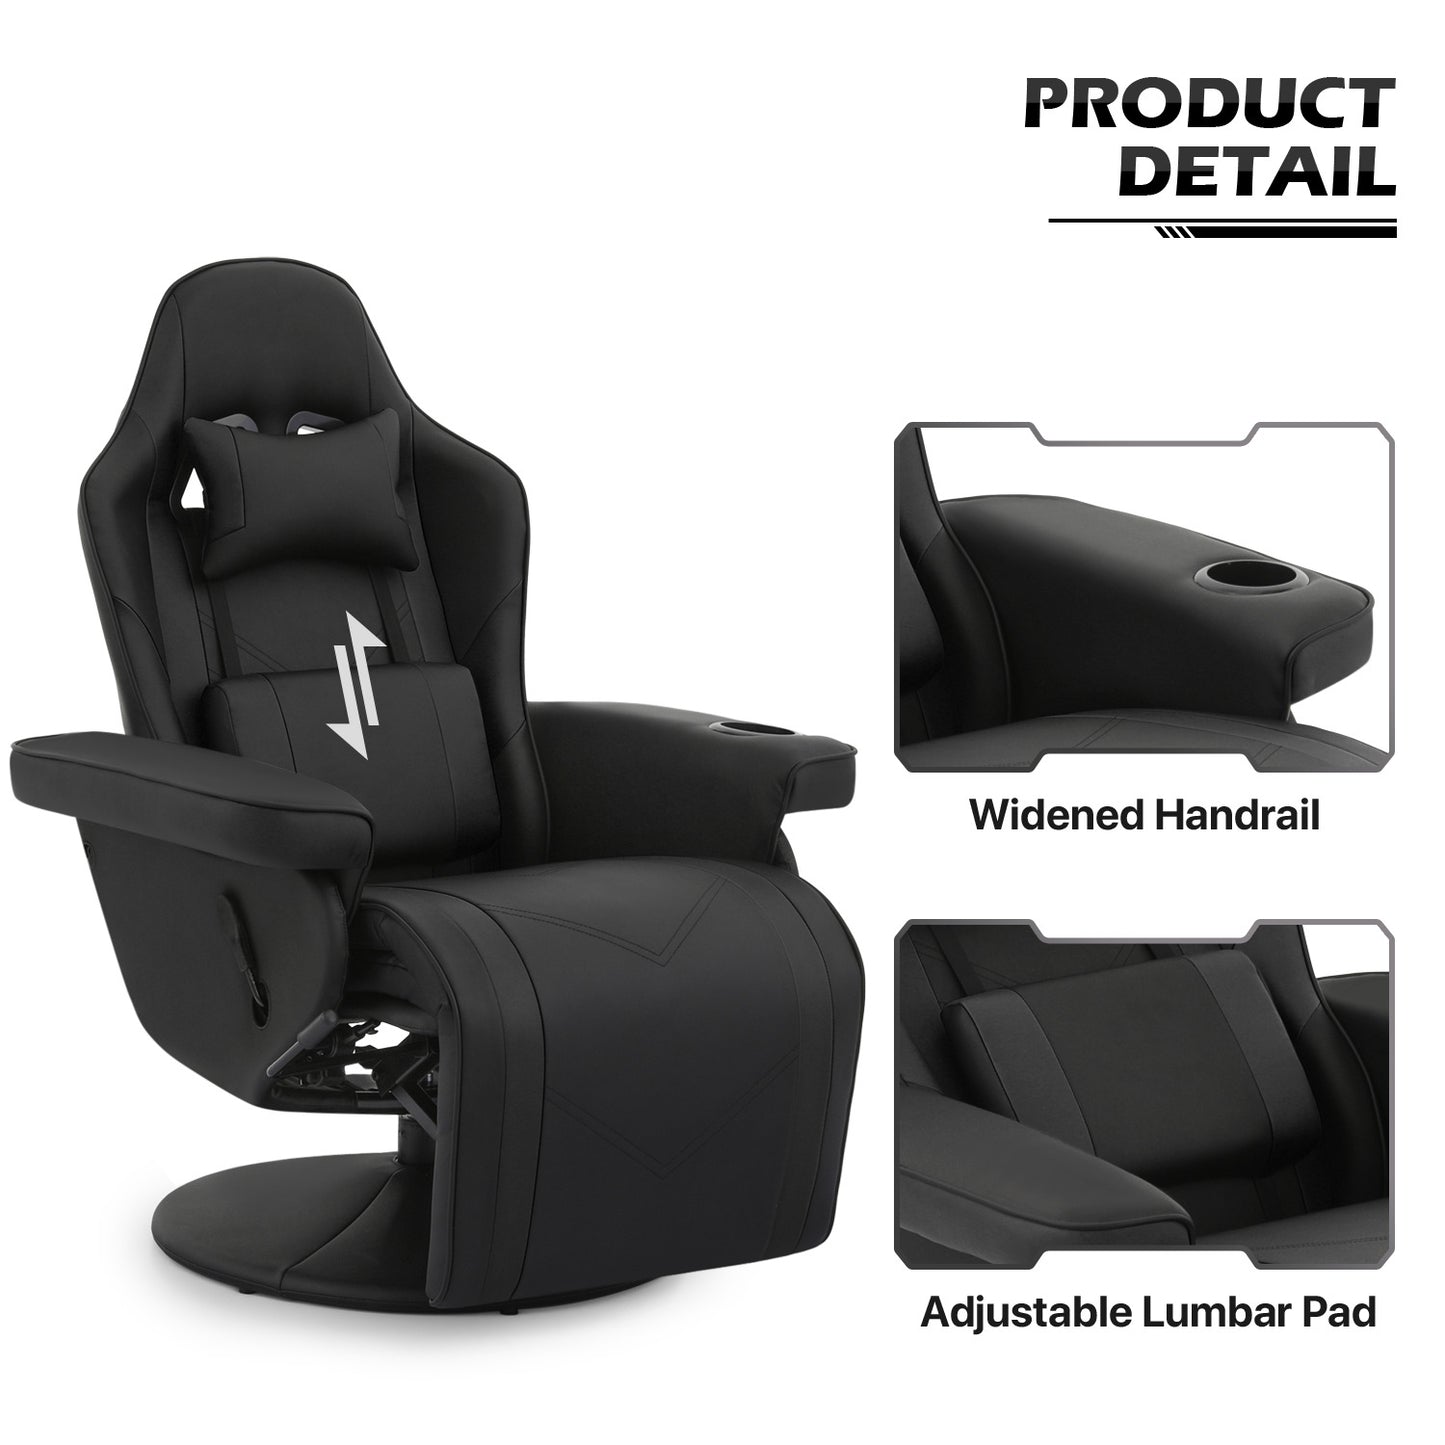 Reclinable Computer Chair #003